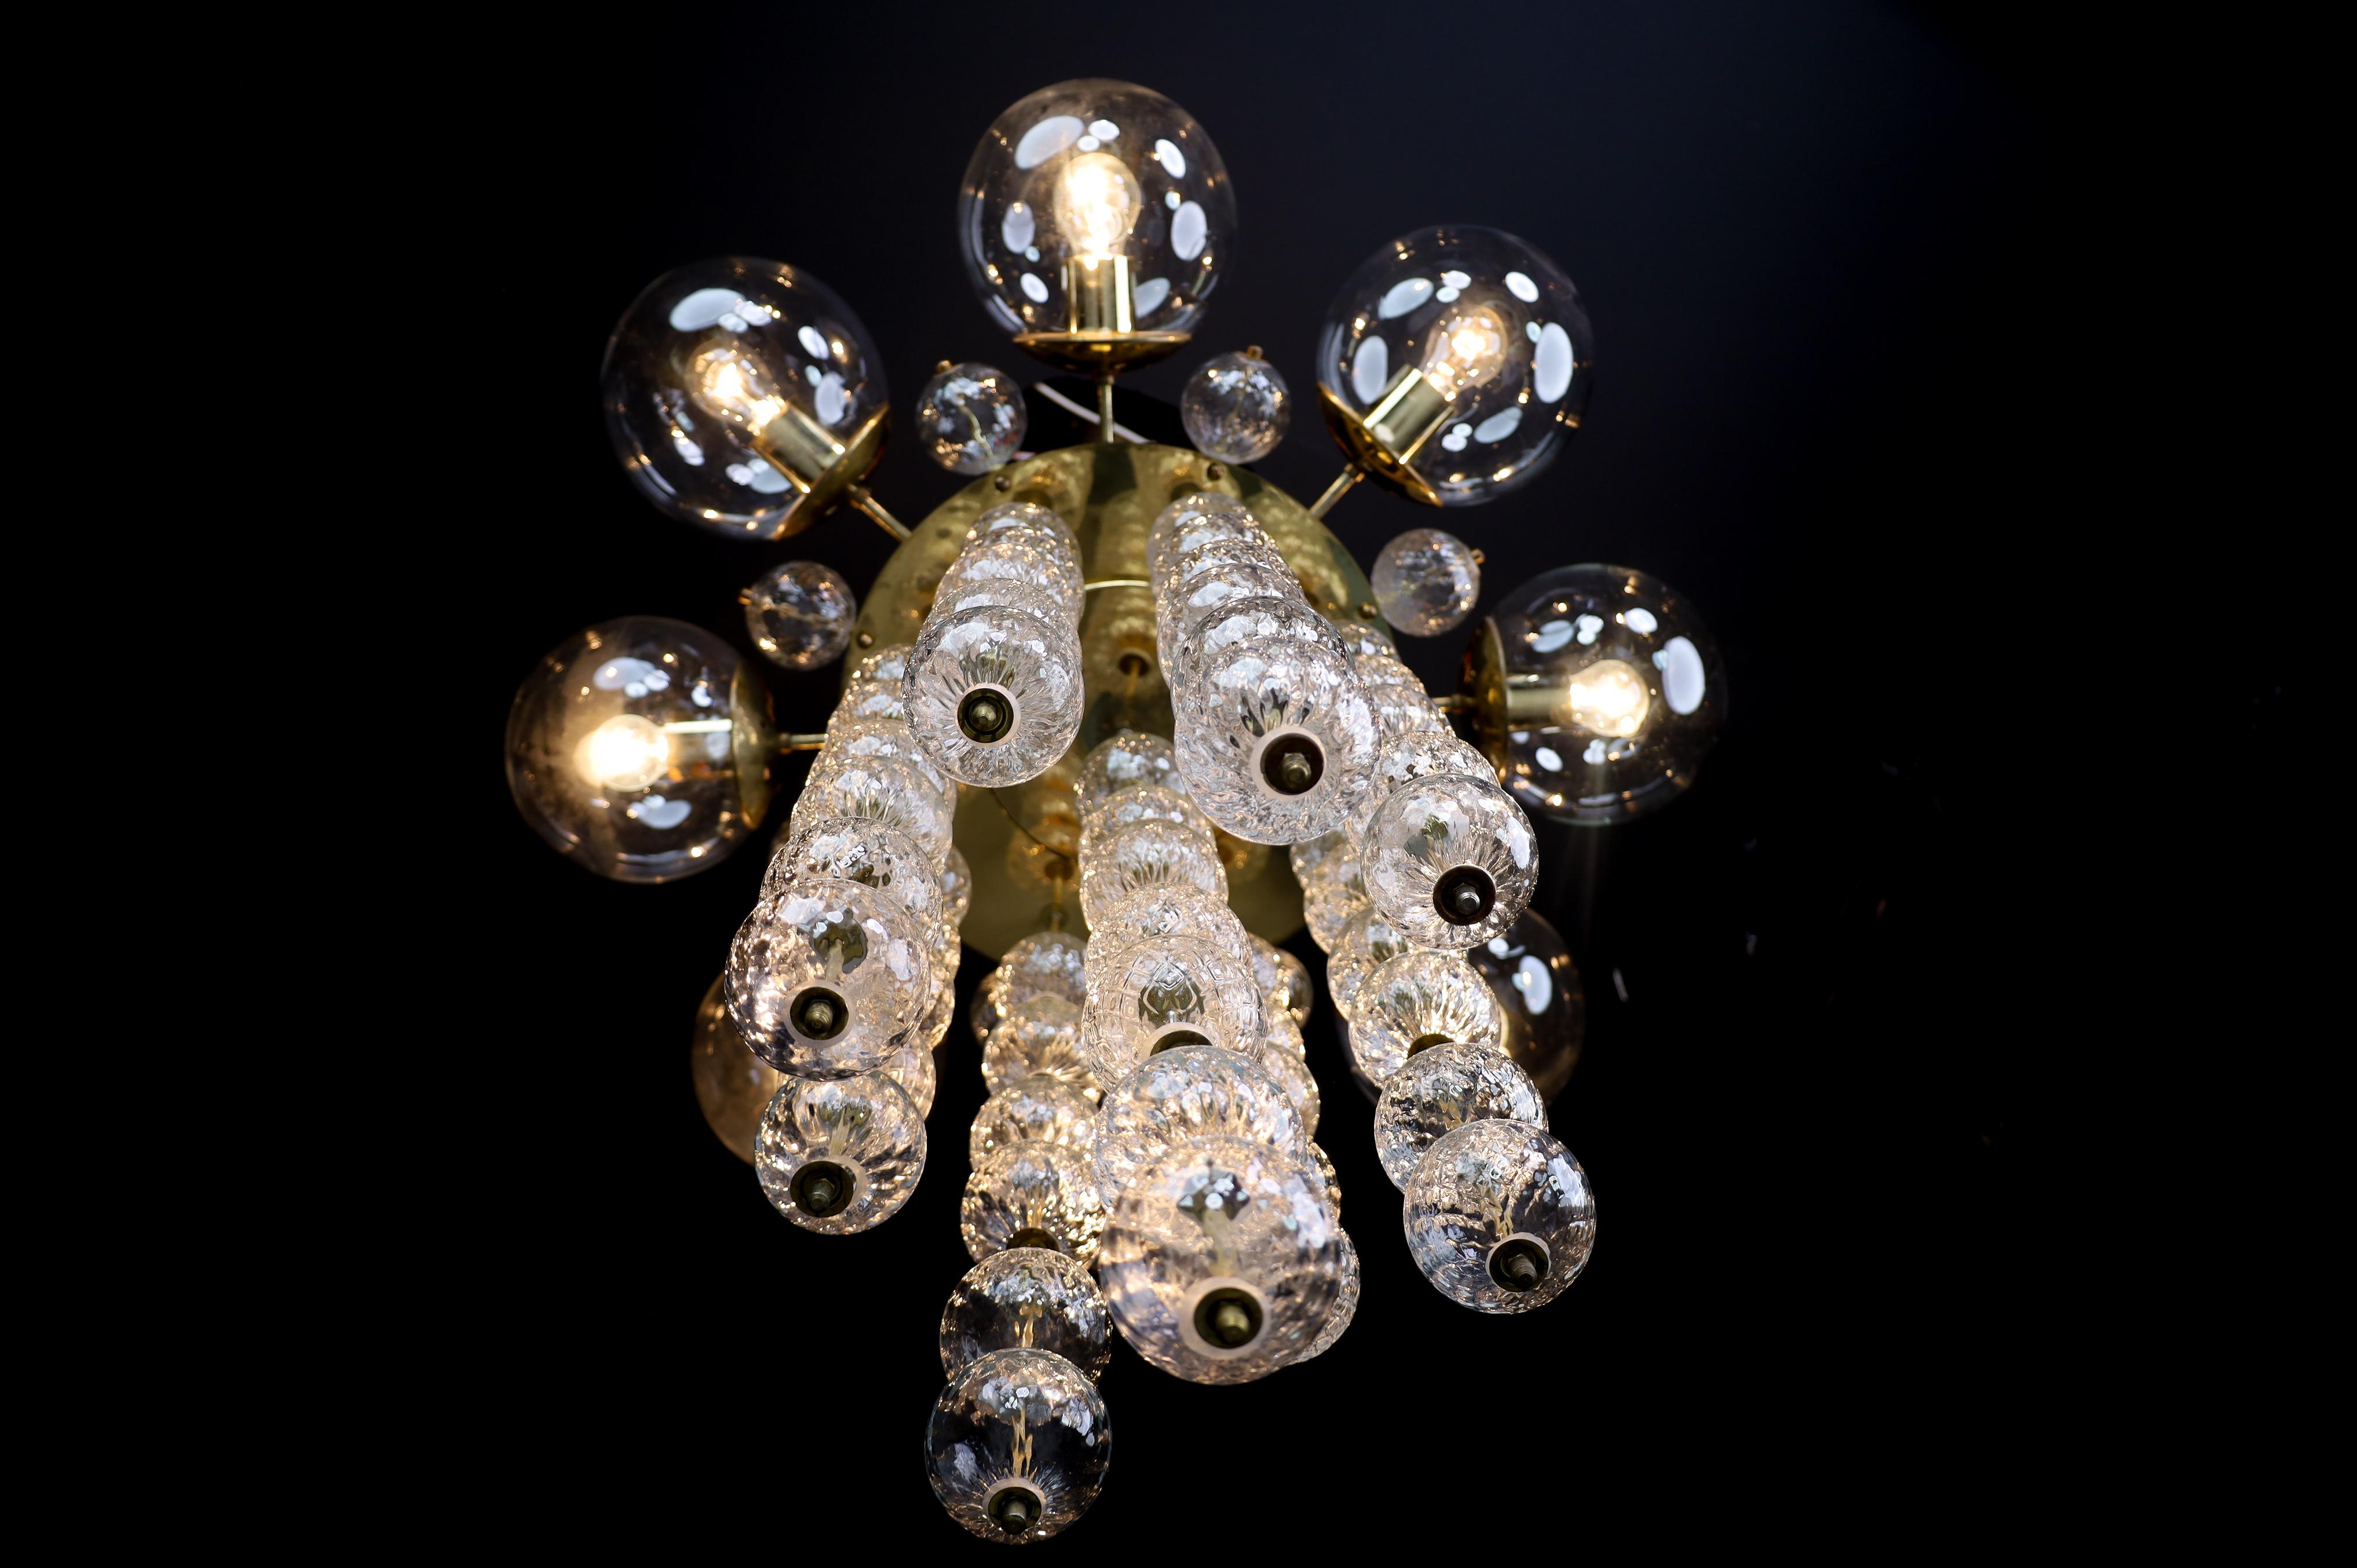 Grand Chandelier with Brass Fixture and Hand-blowed Glass Globes, 1960s For Sale 5